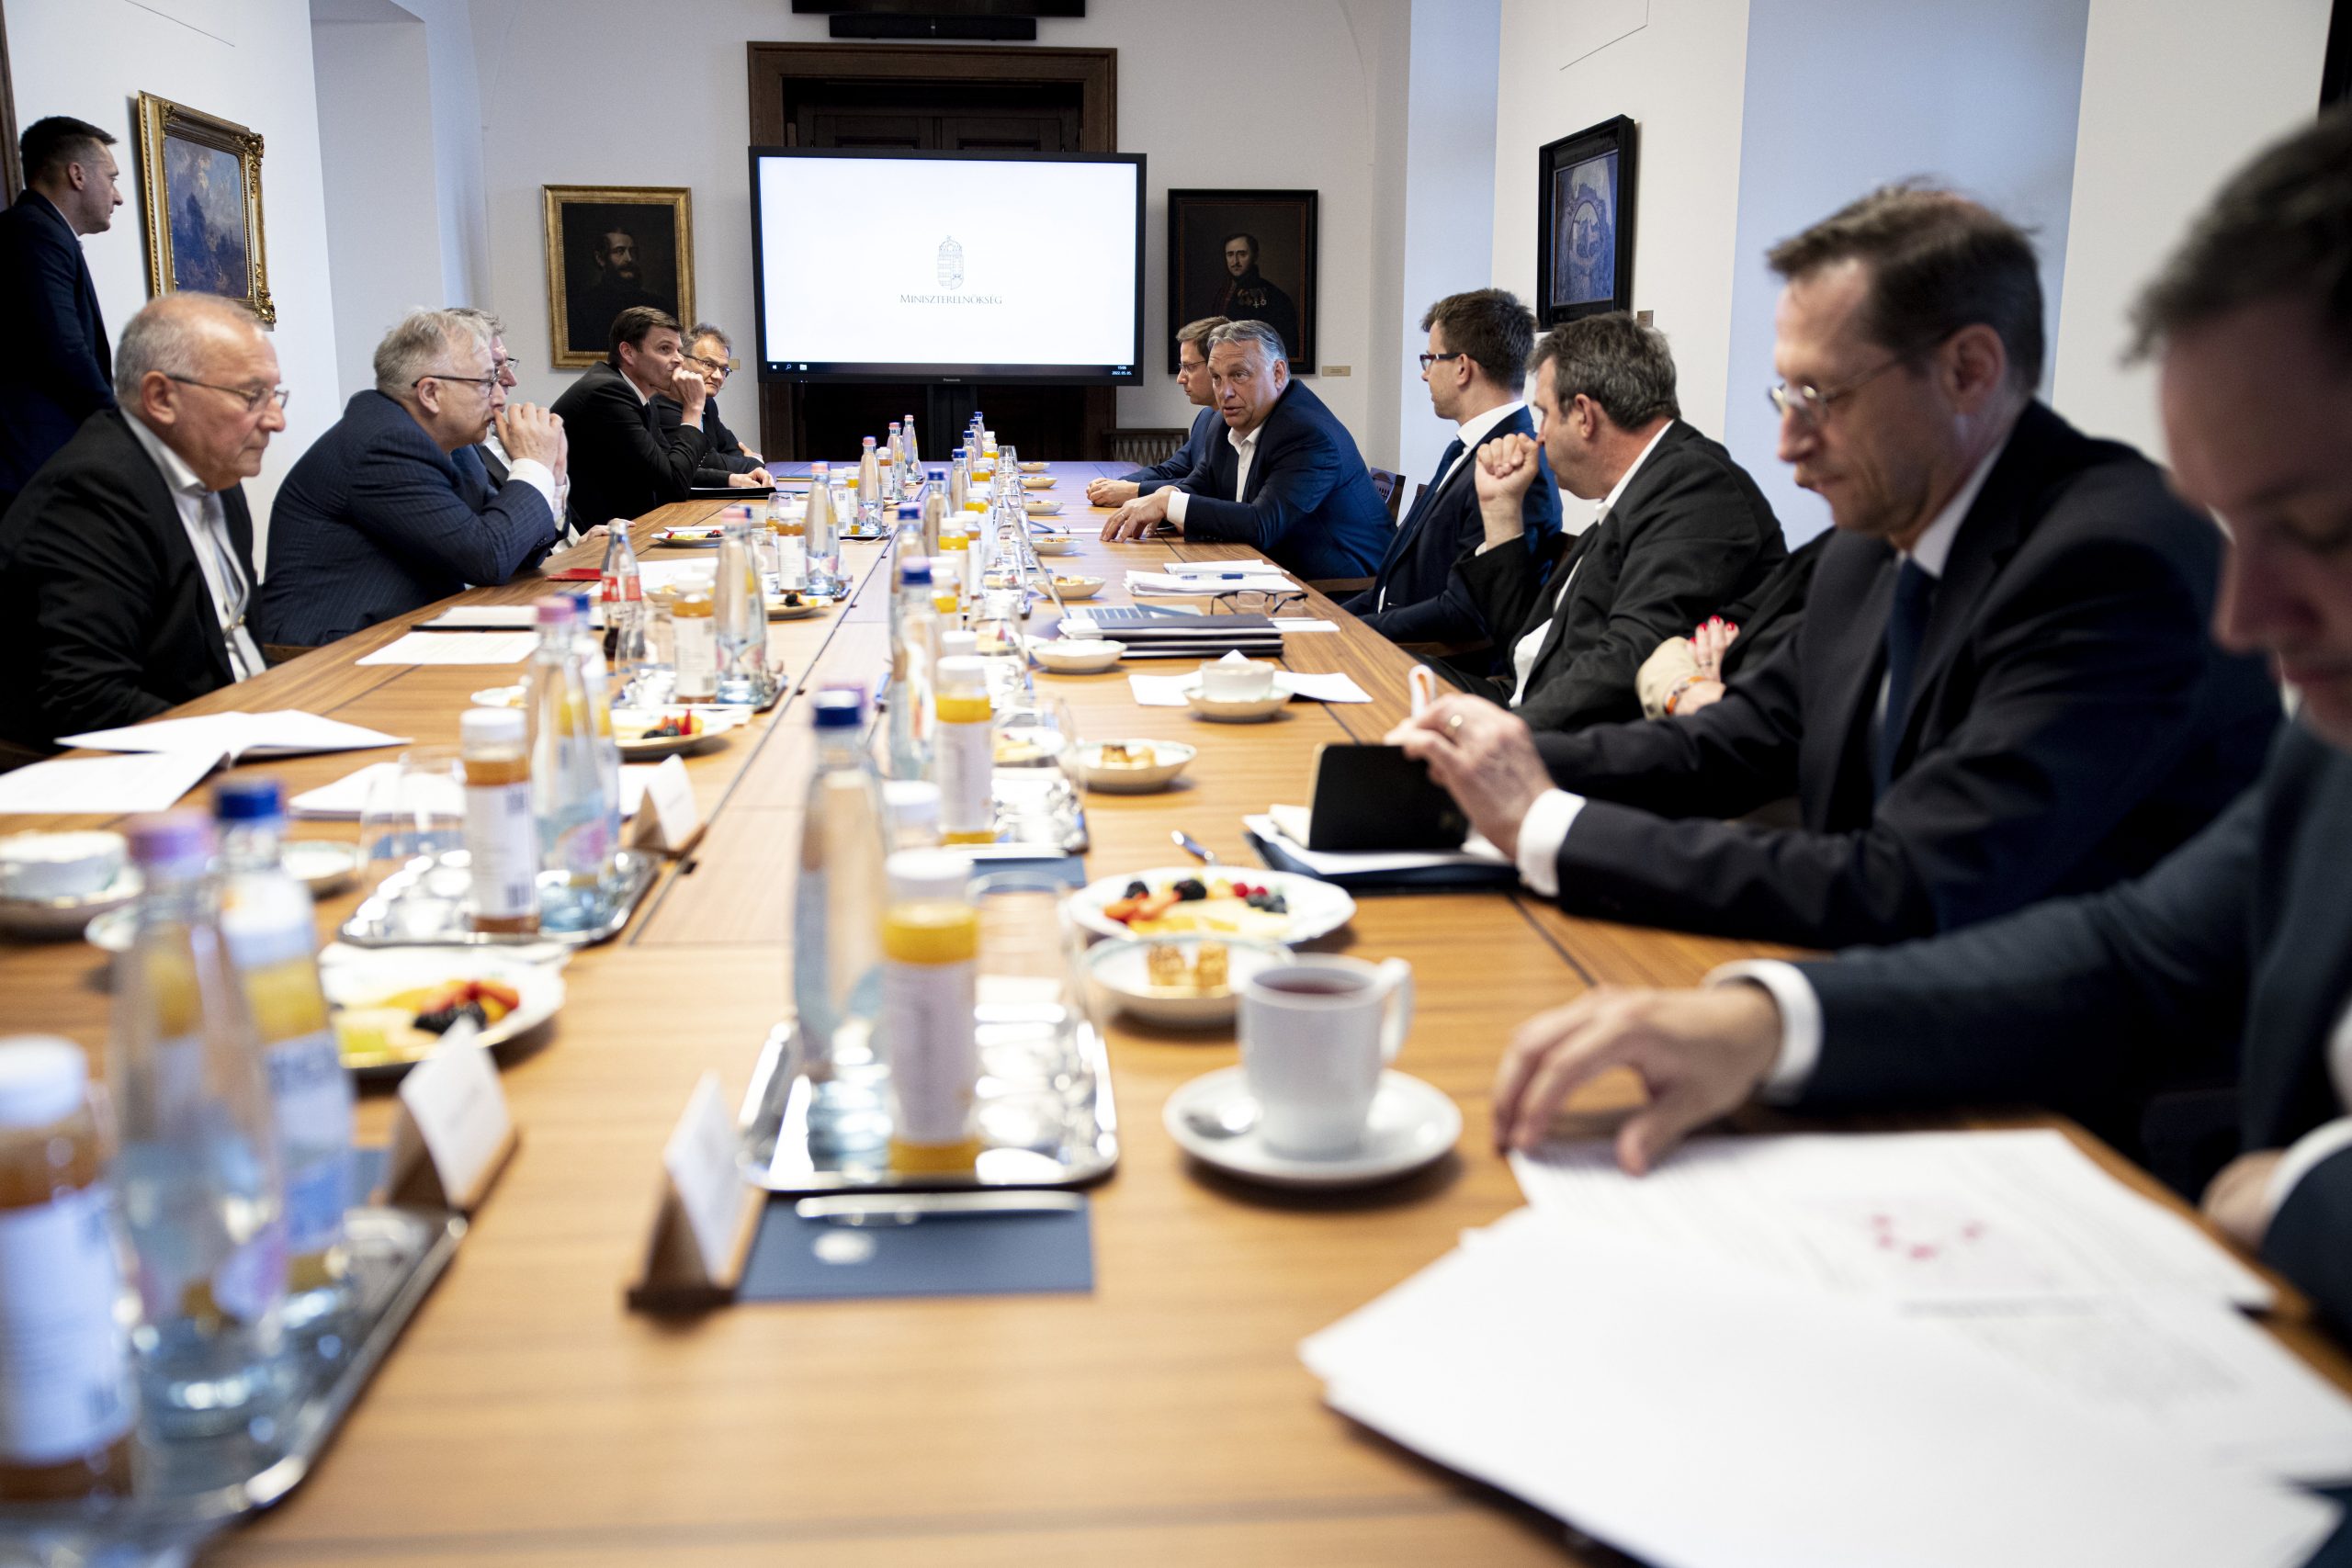 PM Orbán Convenes Meeting to Discuss Brussels Oil Sanctions